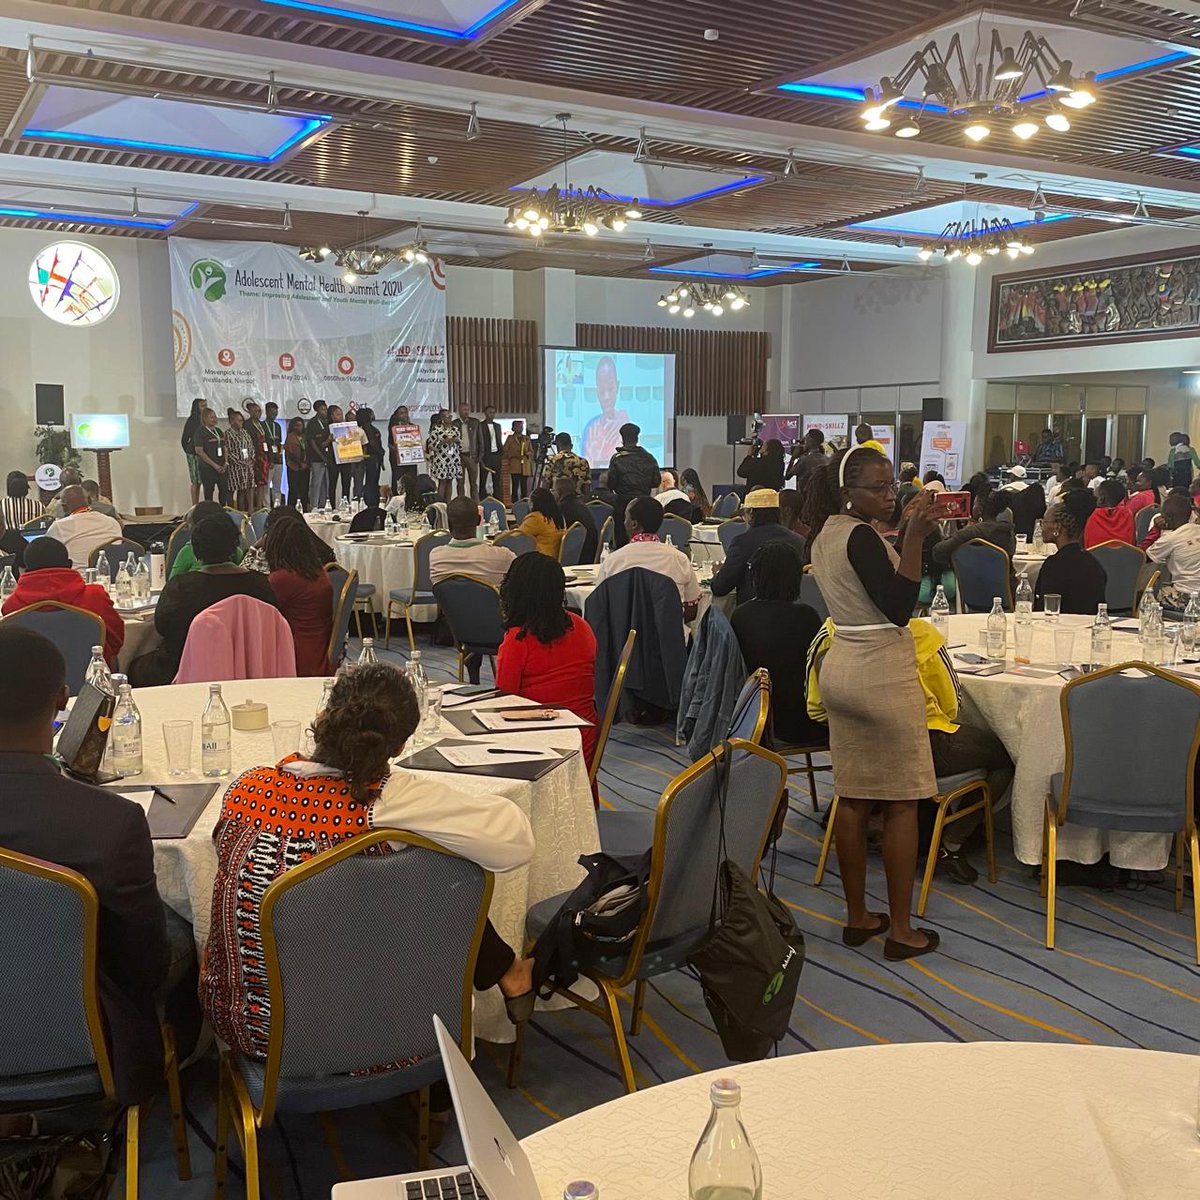 Proud to join the conversation at the Adolescent Mental Health Summit in Kenya. Together, we can break the stigma and provide better support for adolescents and youths facing mental health challenges. #MentalHealthKenya #YouthWellbeing @LVCTKe #tubongeone2one #mindskillz #AMHS